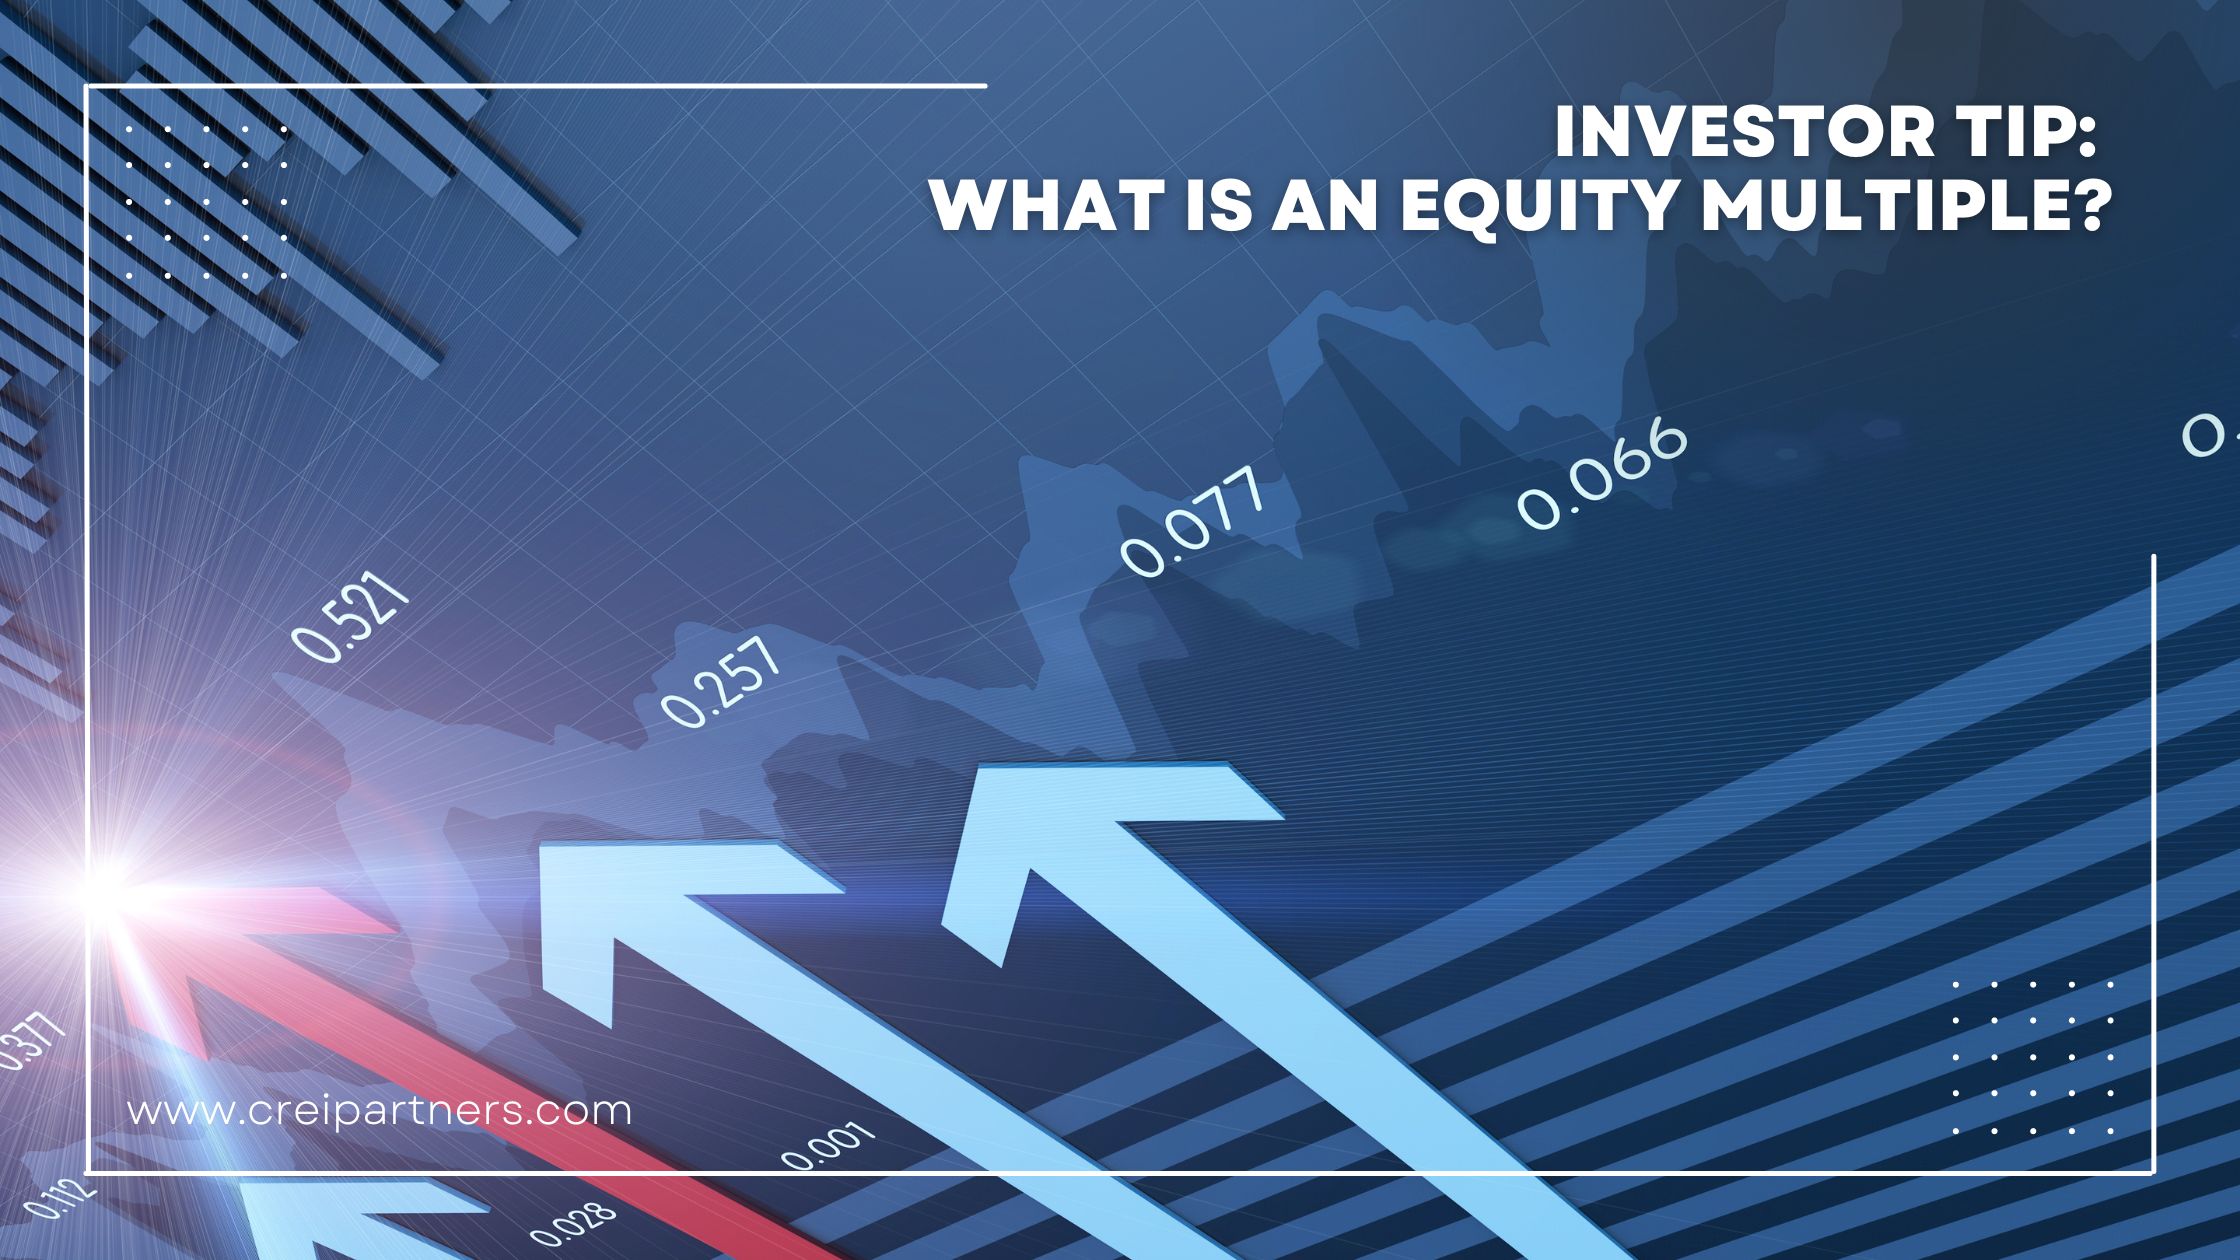 Investor Tip: What is an Equity Multiple?